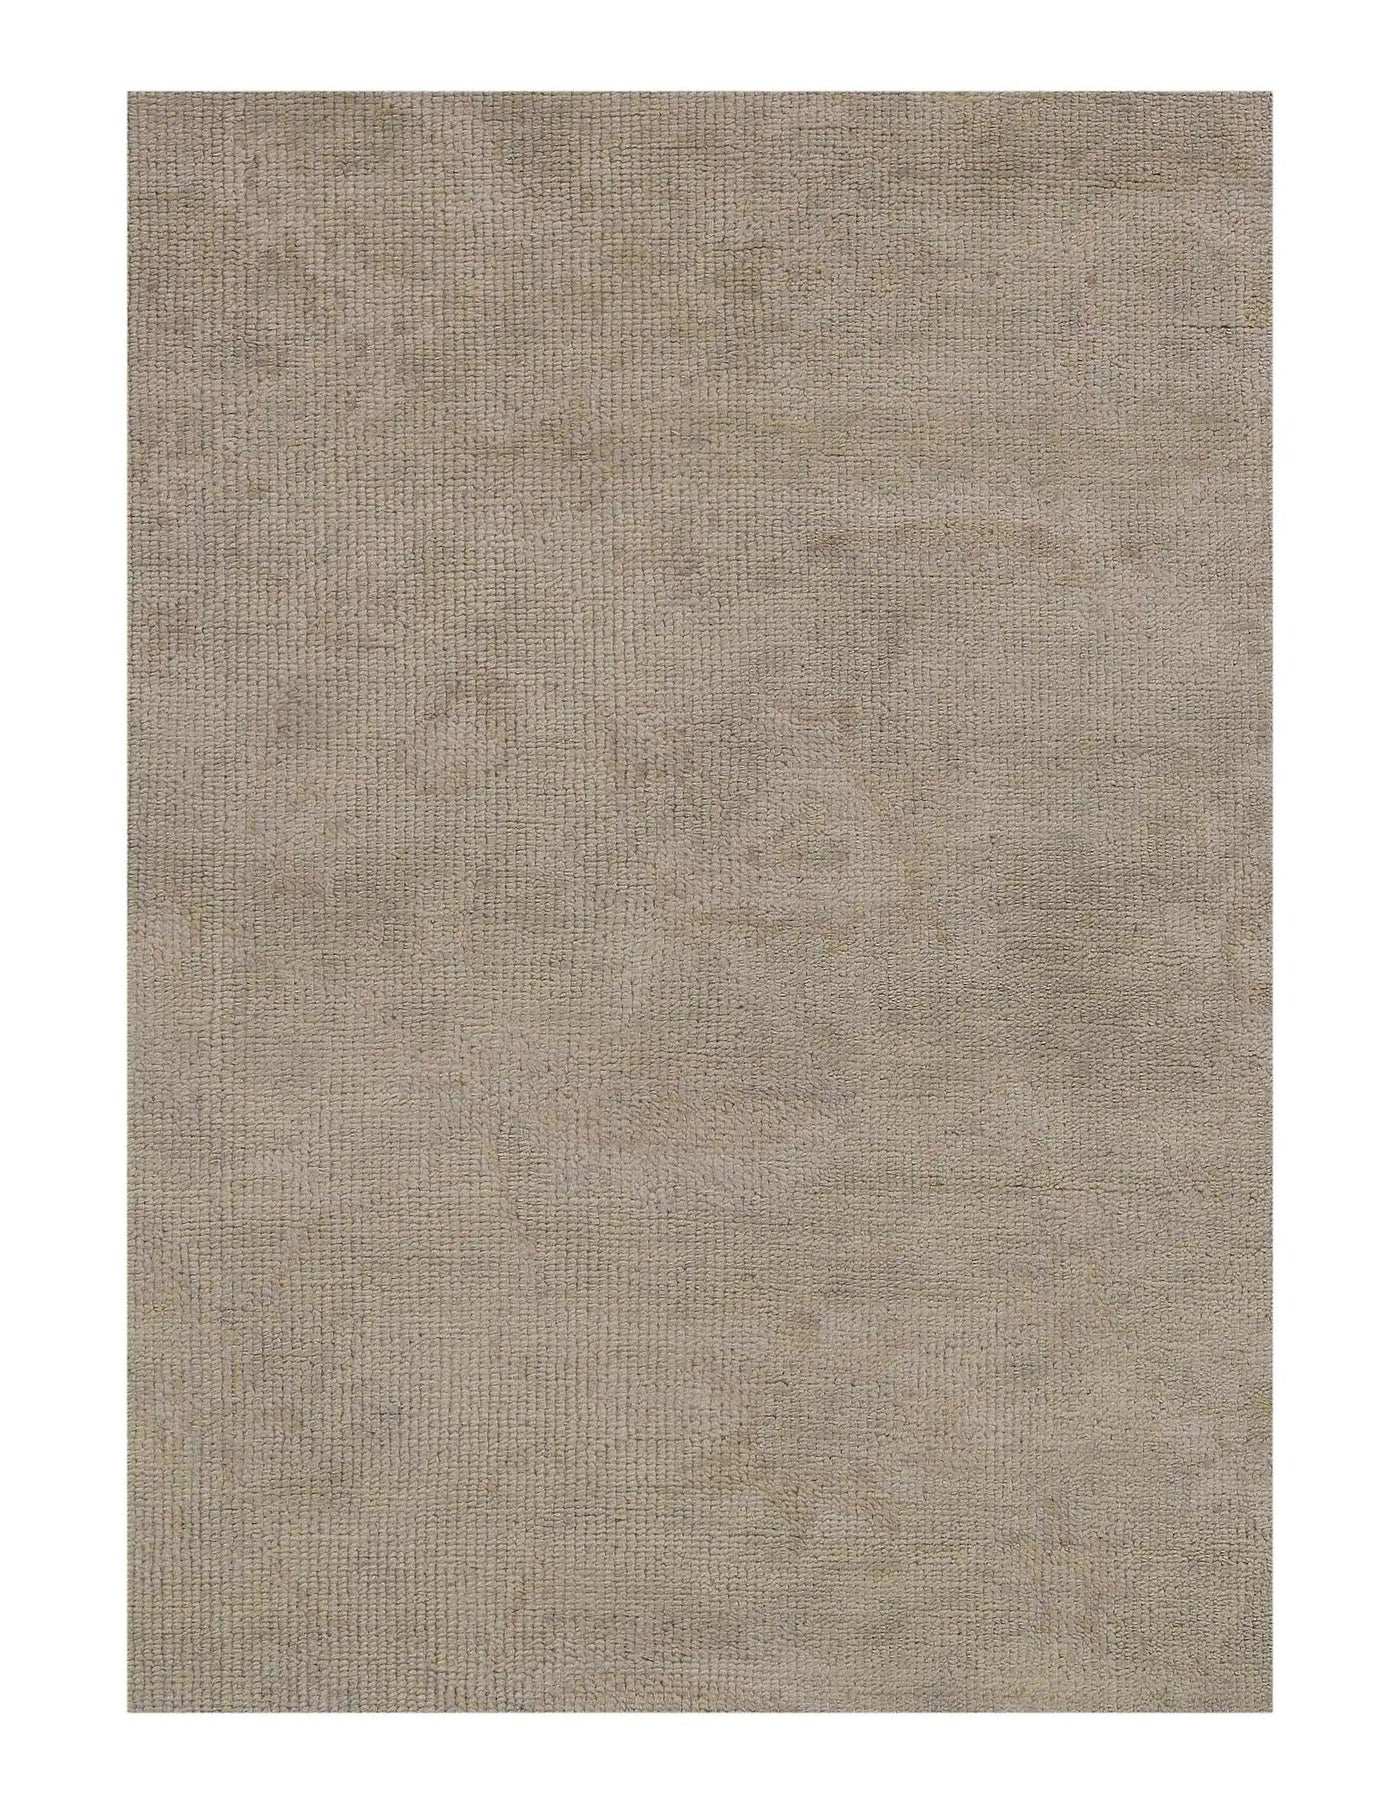 Traditional Oushak Design Hand Knotted Rug - 7'9" x 9'10"